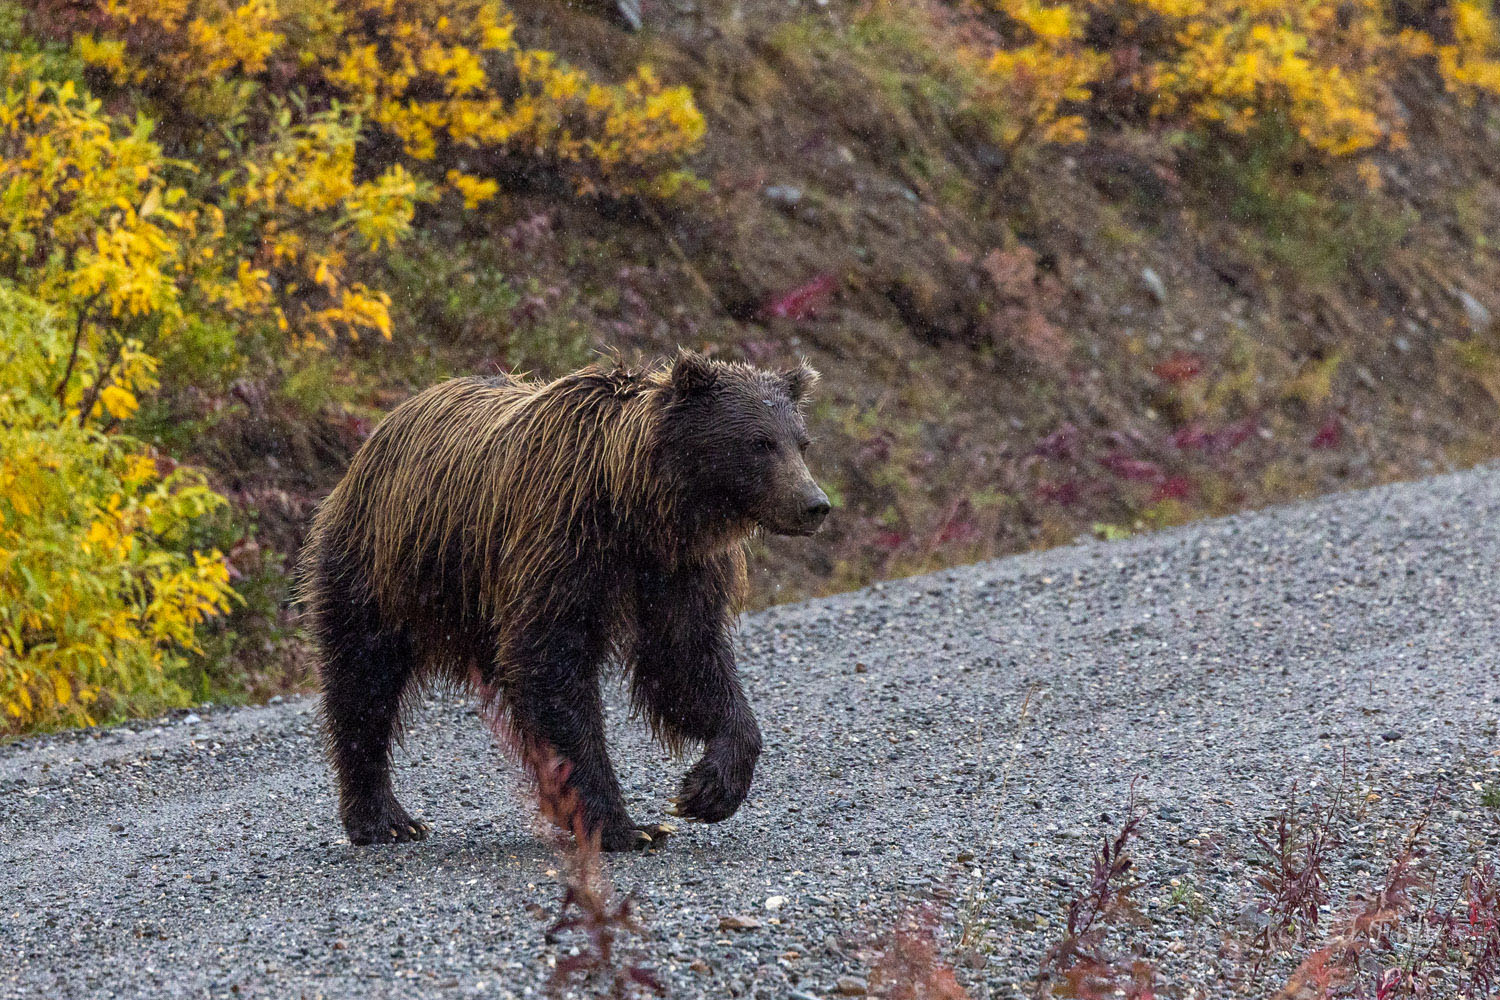 A grizzly bear enjoys the easy passage that the road - closed for more than a year - allows.